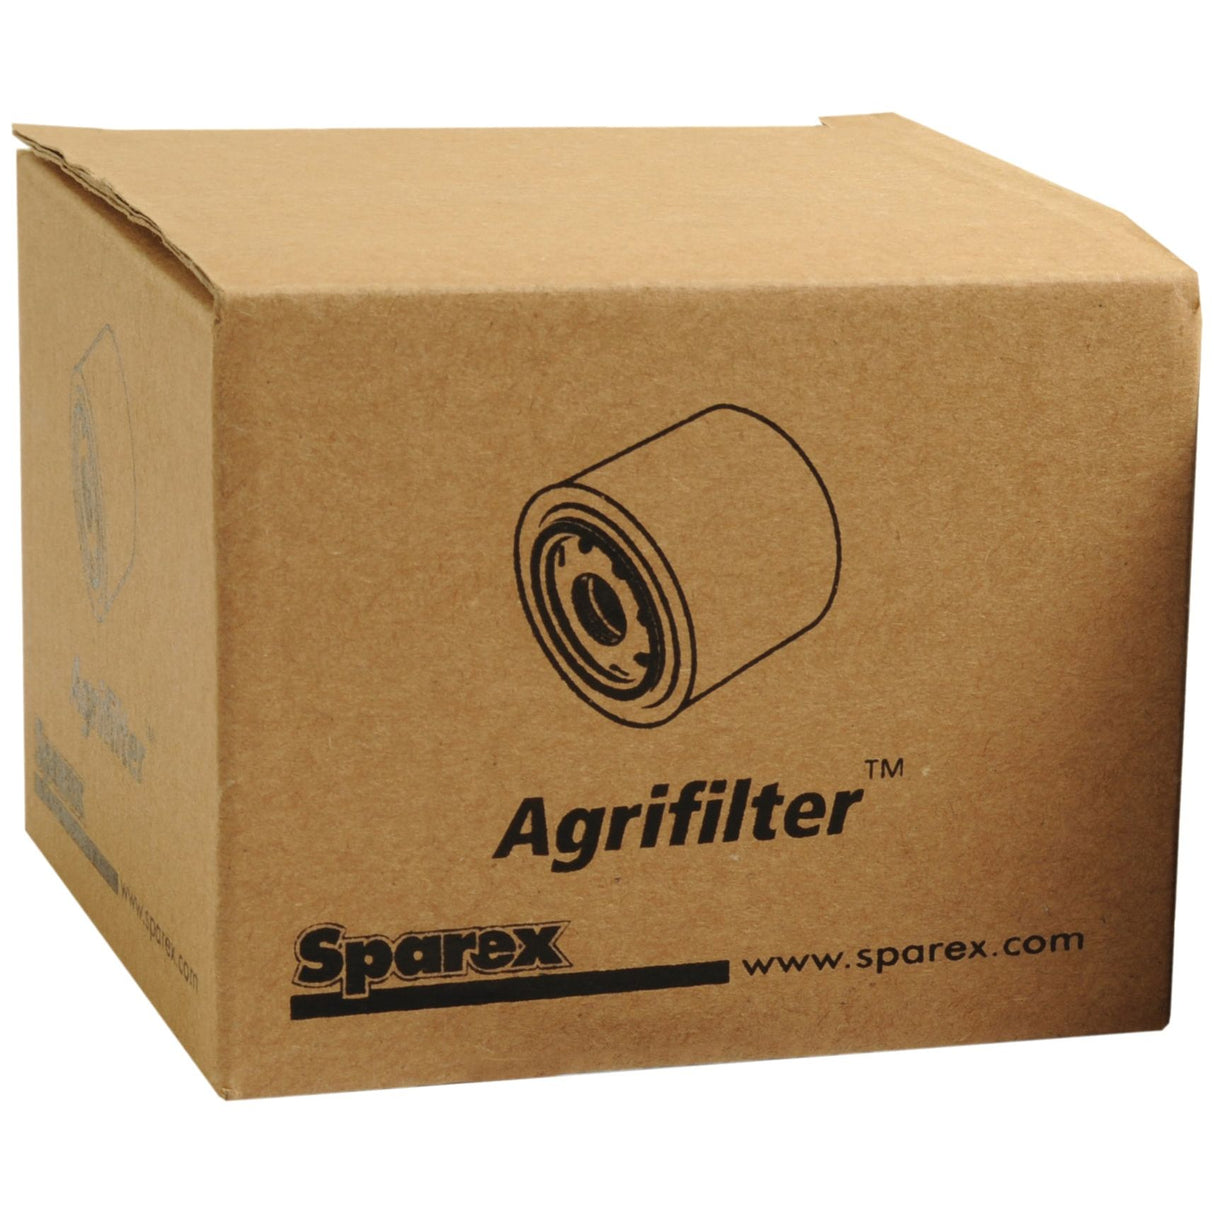 Oil Filter - Spin On -
 - S.76504 - Massey Tractor Parts